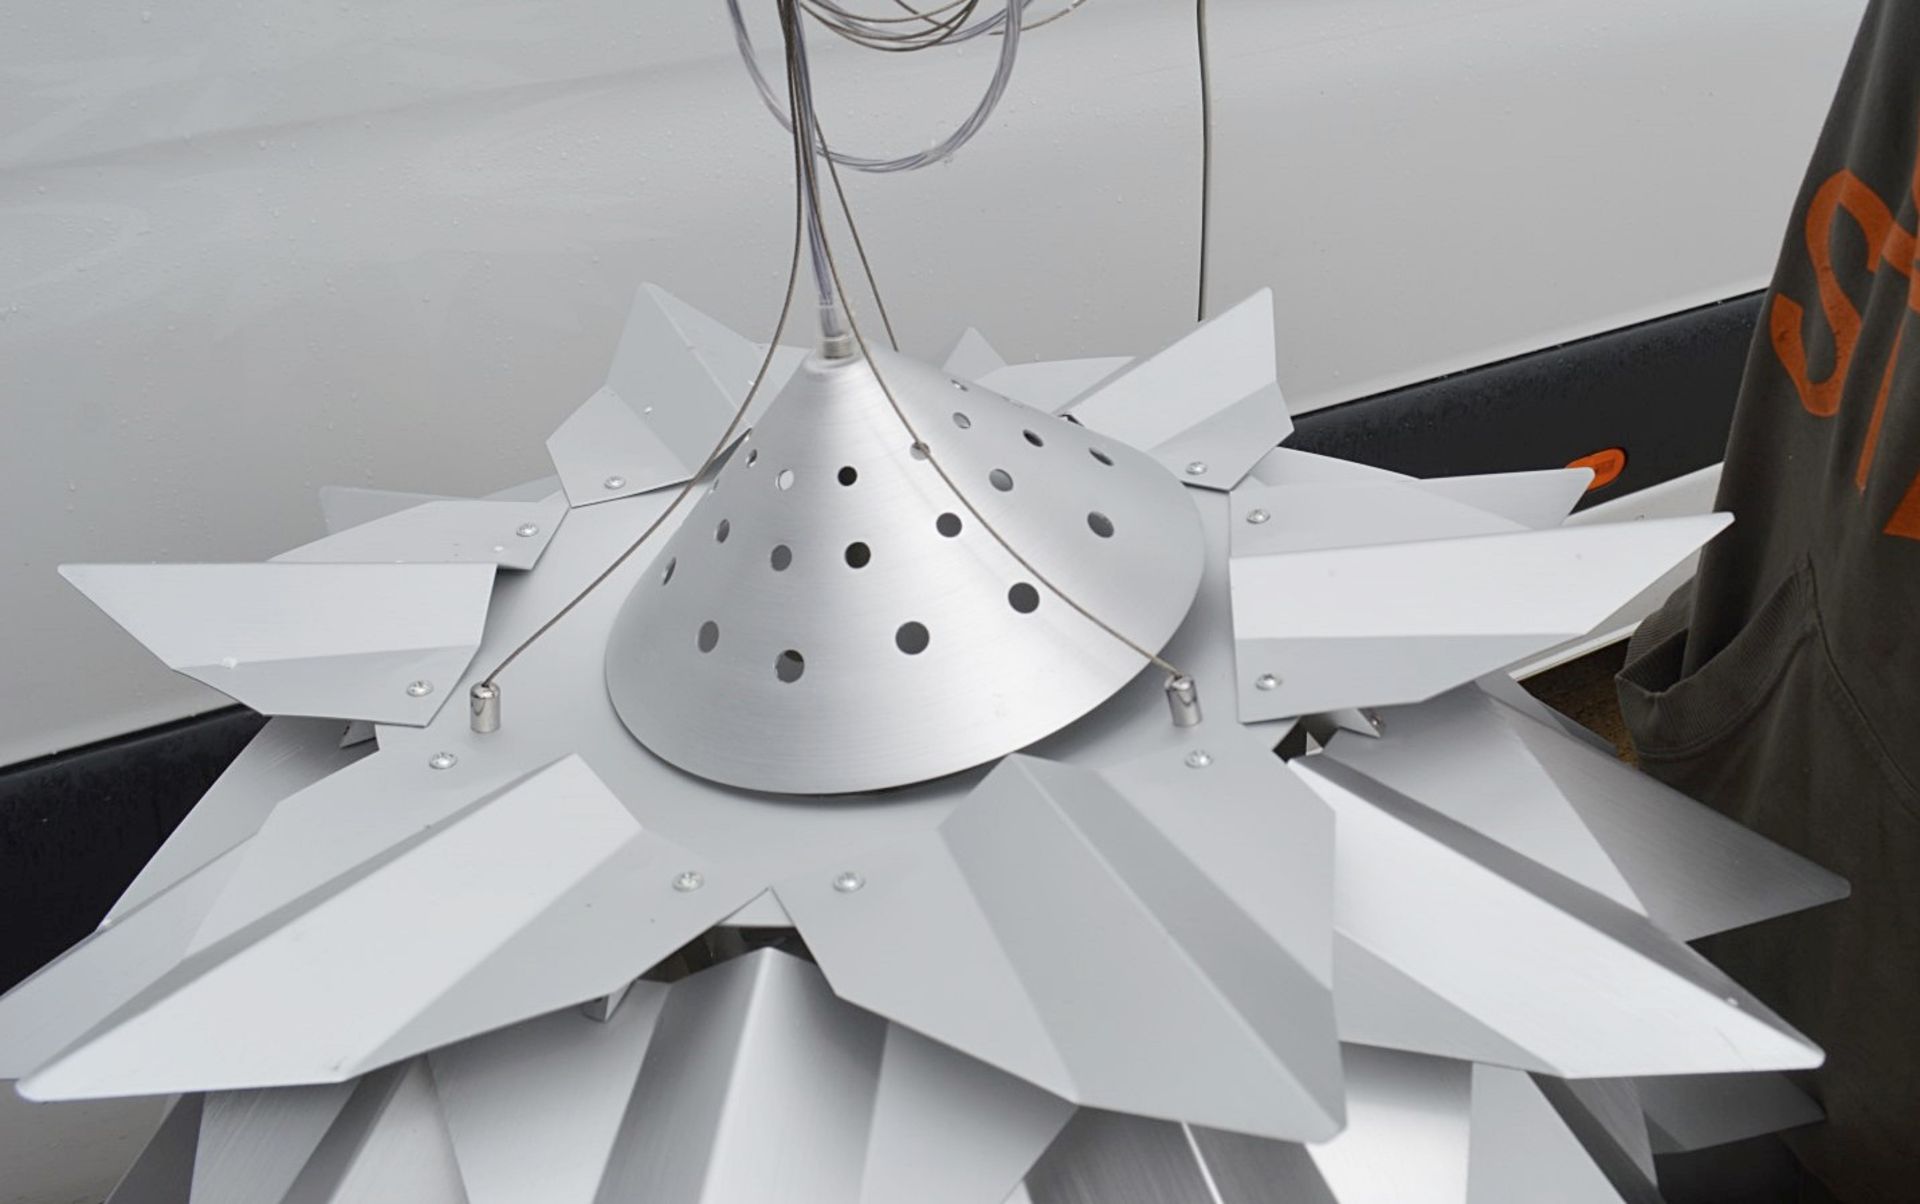 1 x 'Comosus' Statement Ceiling Pendant Light In Aluminium With A Brushed Silver Finish - Image 2 of 6